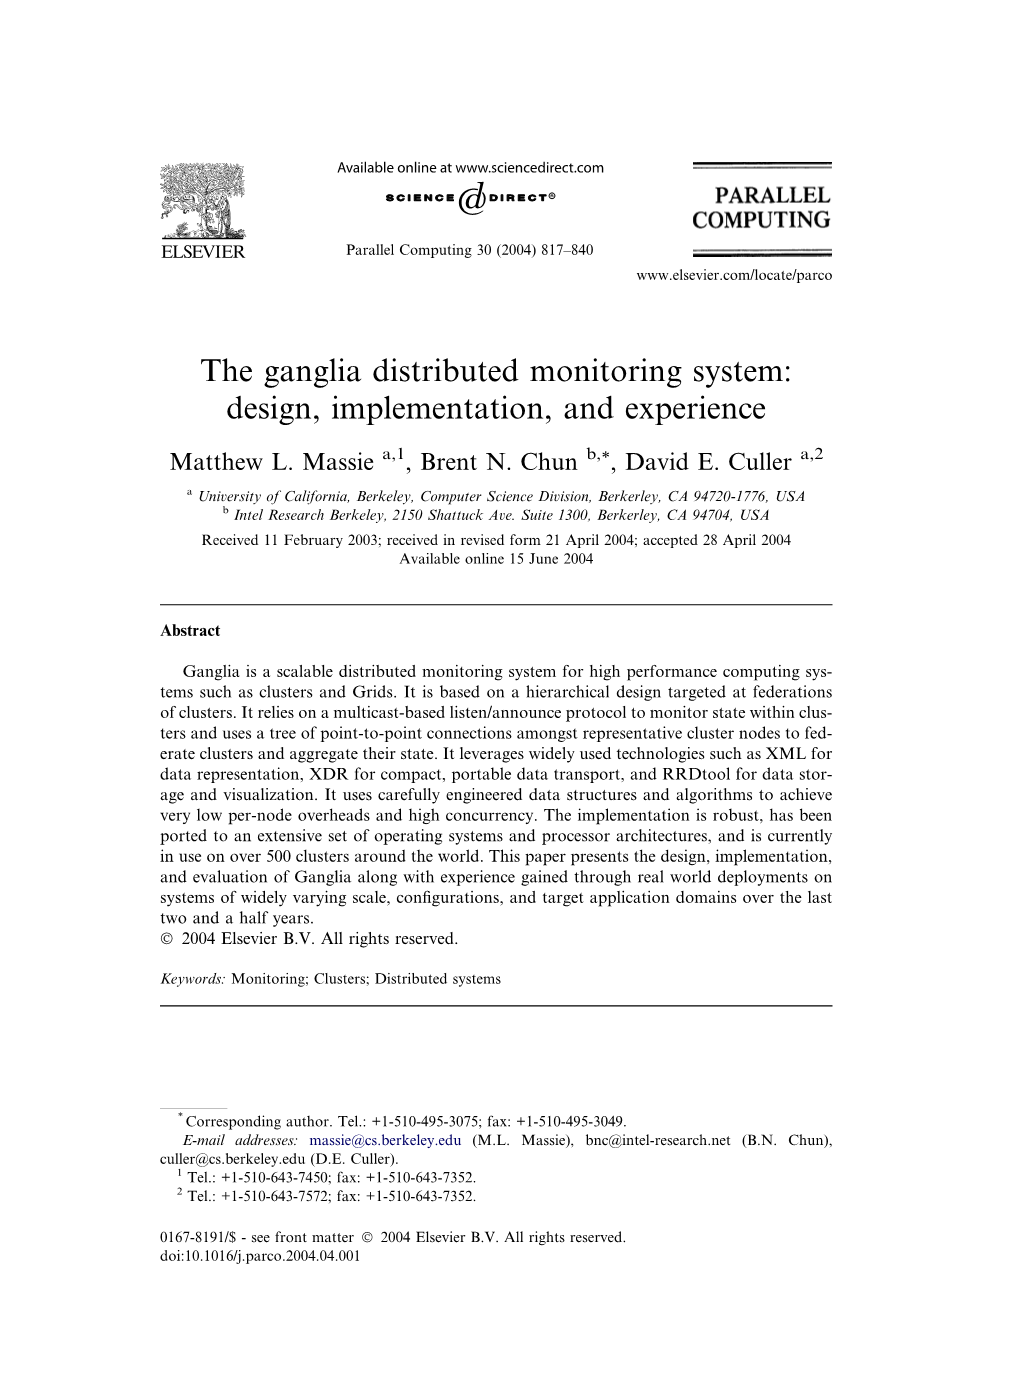 The Ganglia Distributed Monitoring System: Design, Implementation, and Experience